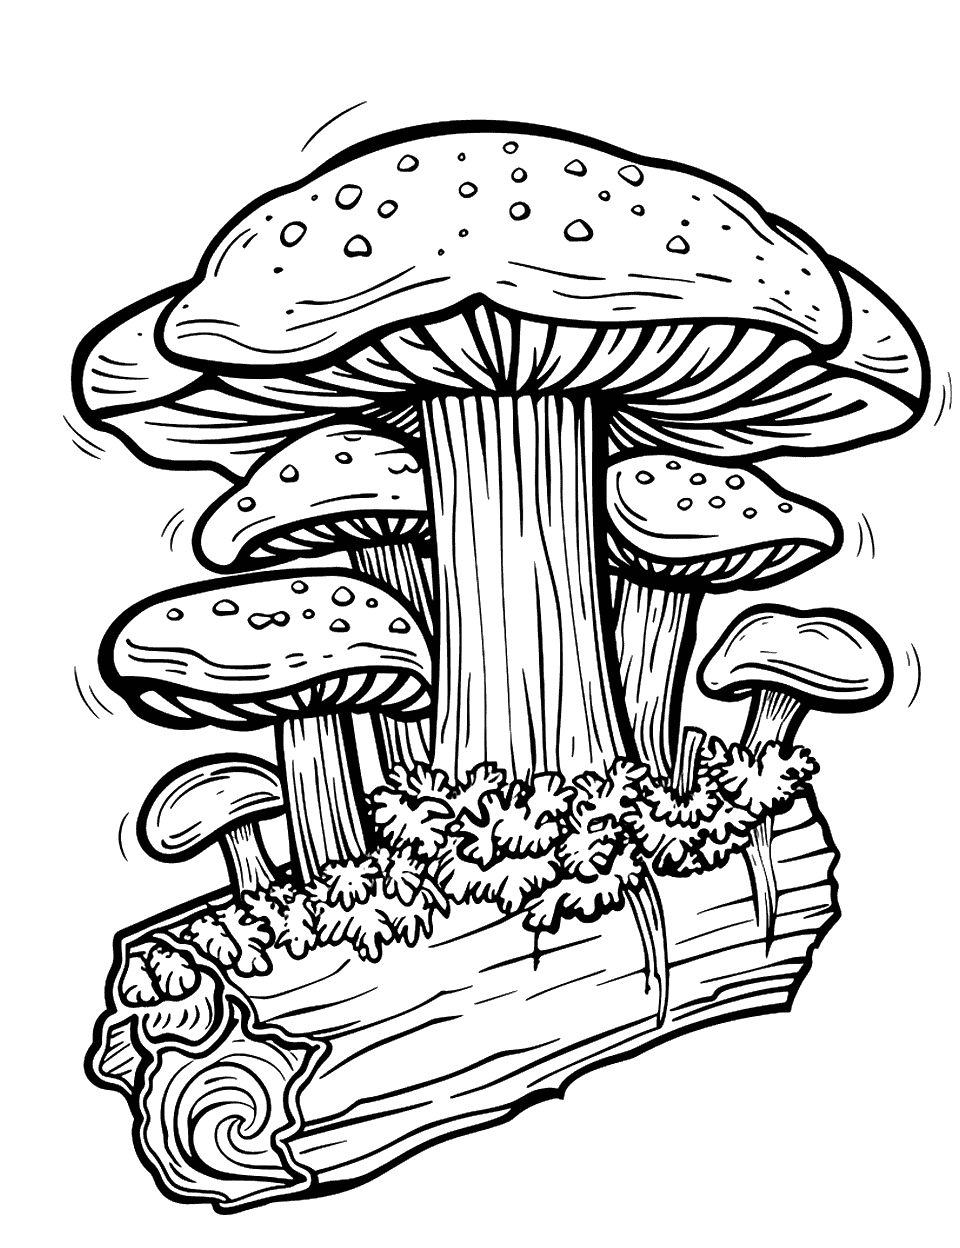 Fungi Collection on a Log Mushroom Coloring Page - Different types of fungi, including mushrooms, growing on an old log.